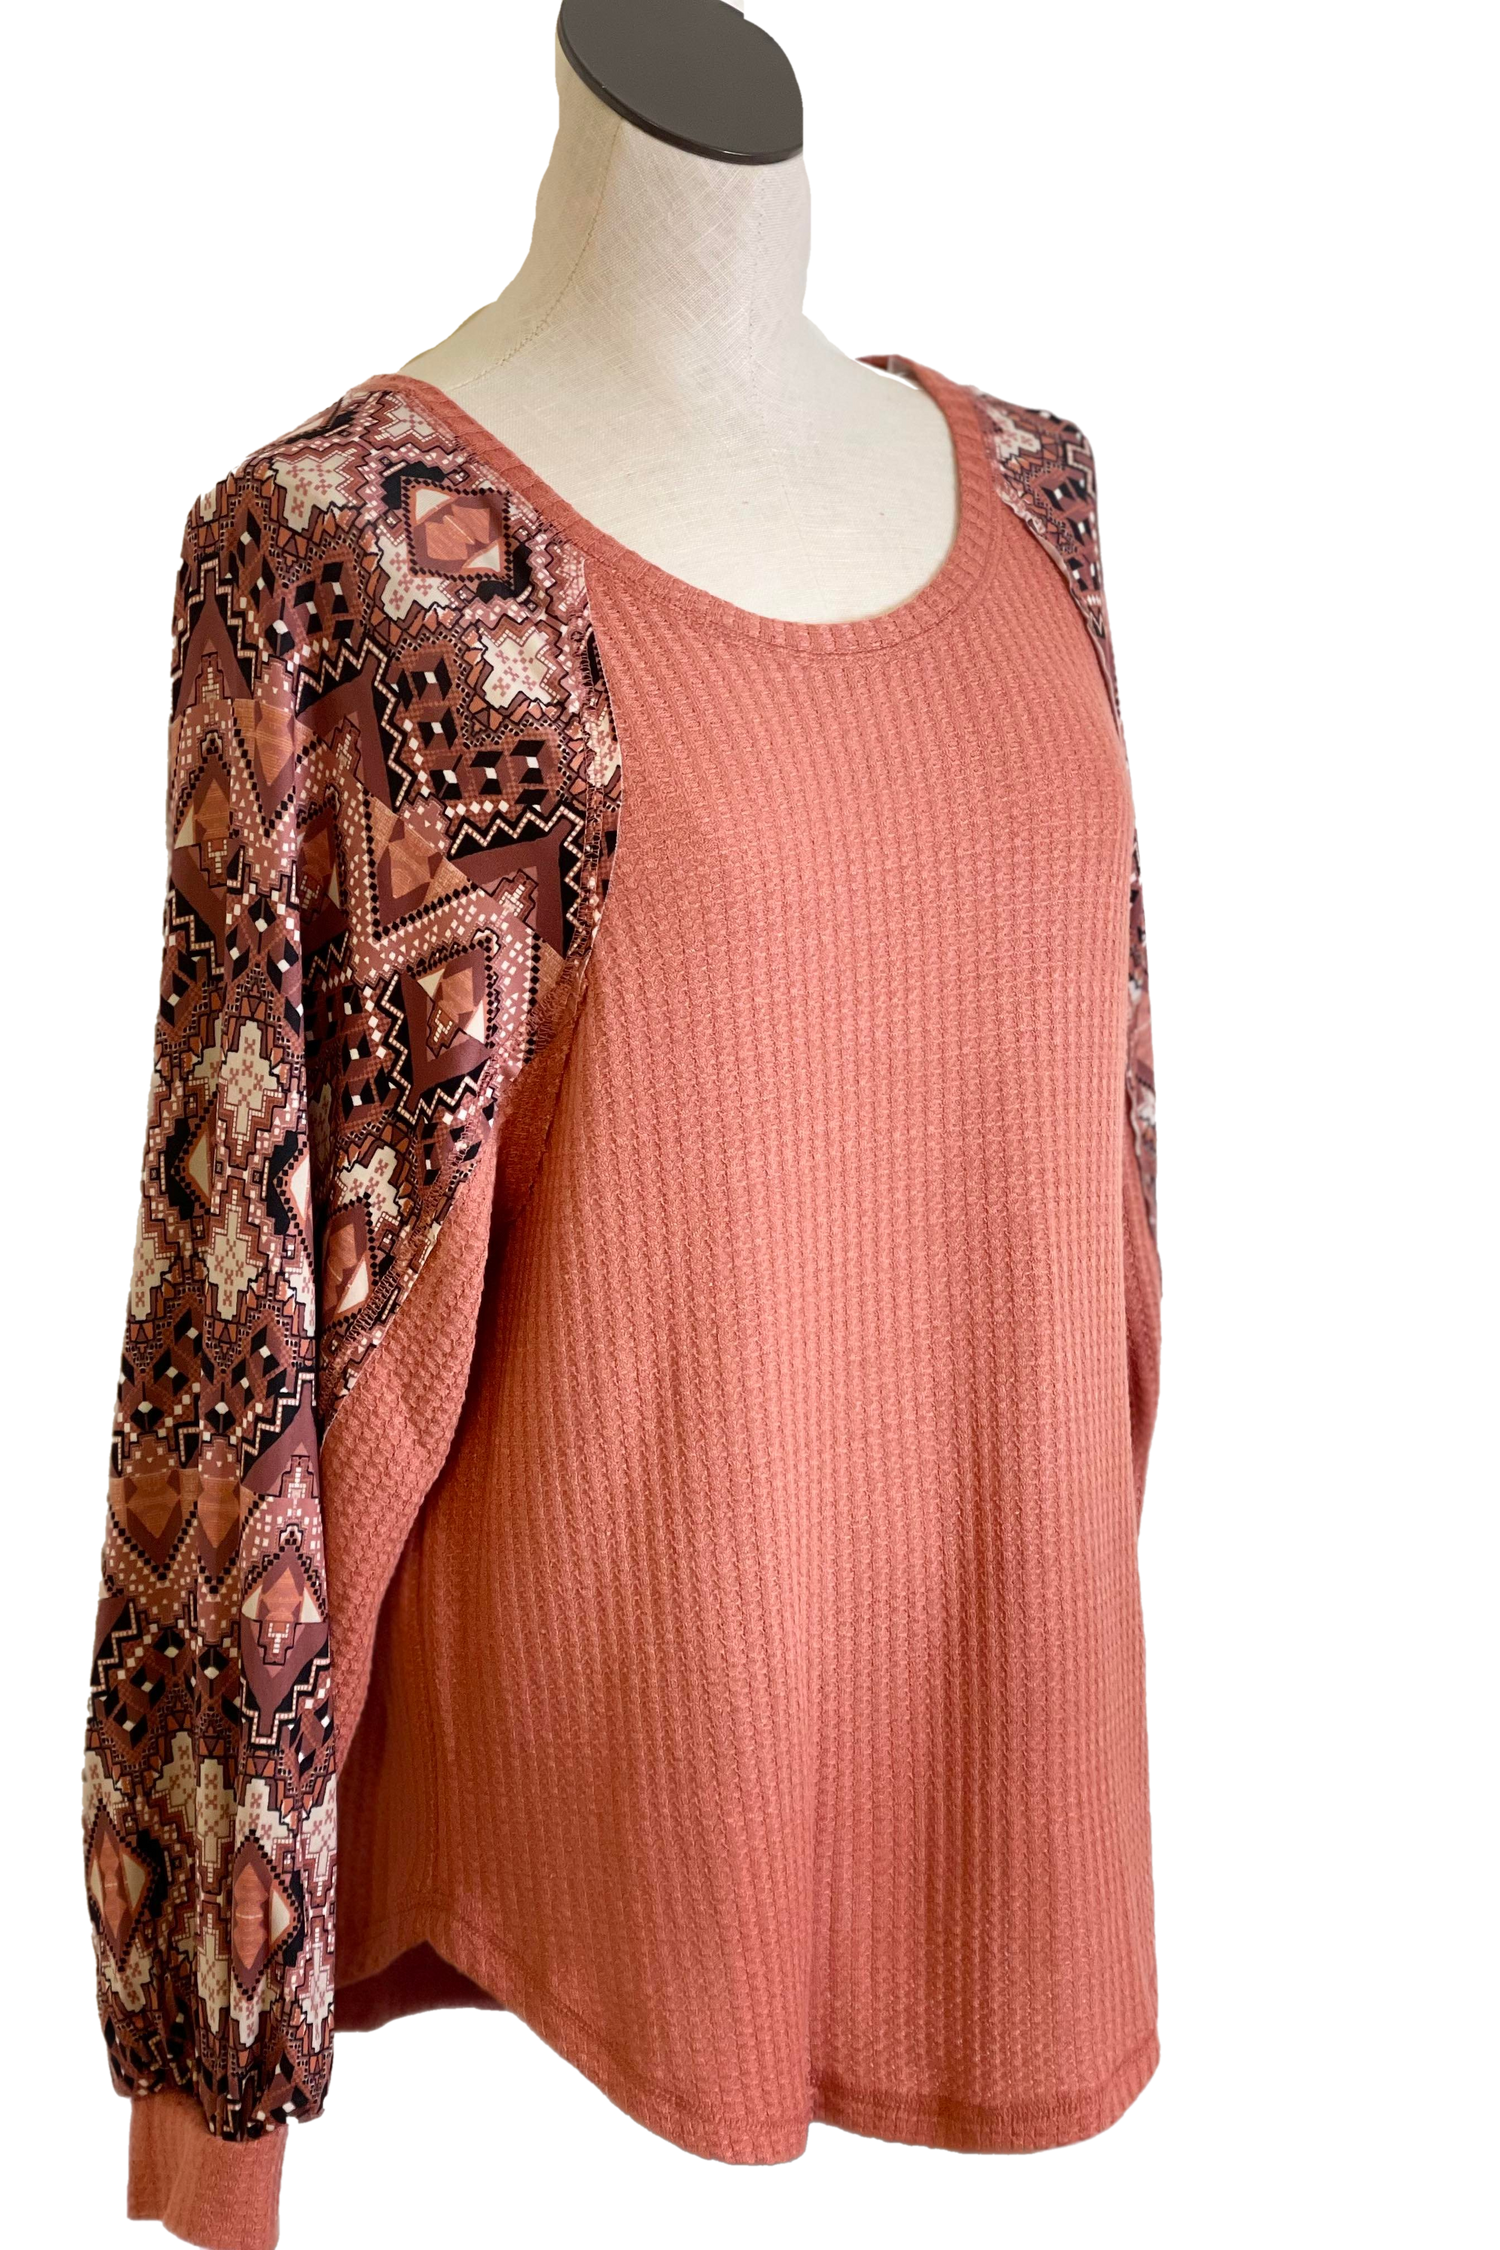 Soft Waffle Weave Shirttail Top with Print Sleeve - Clay - M C and J